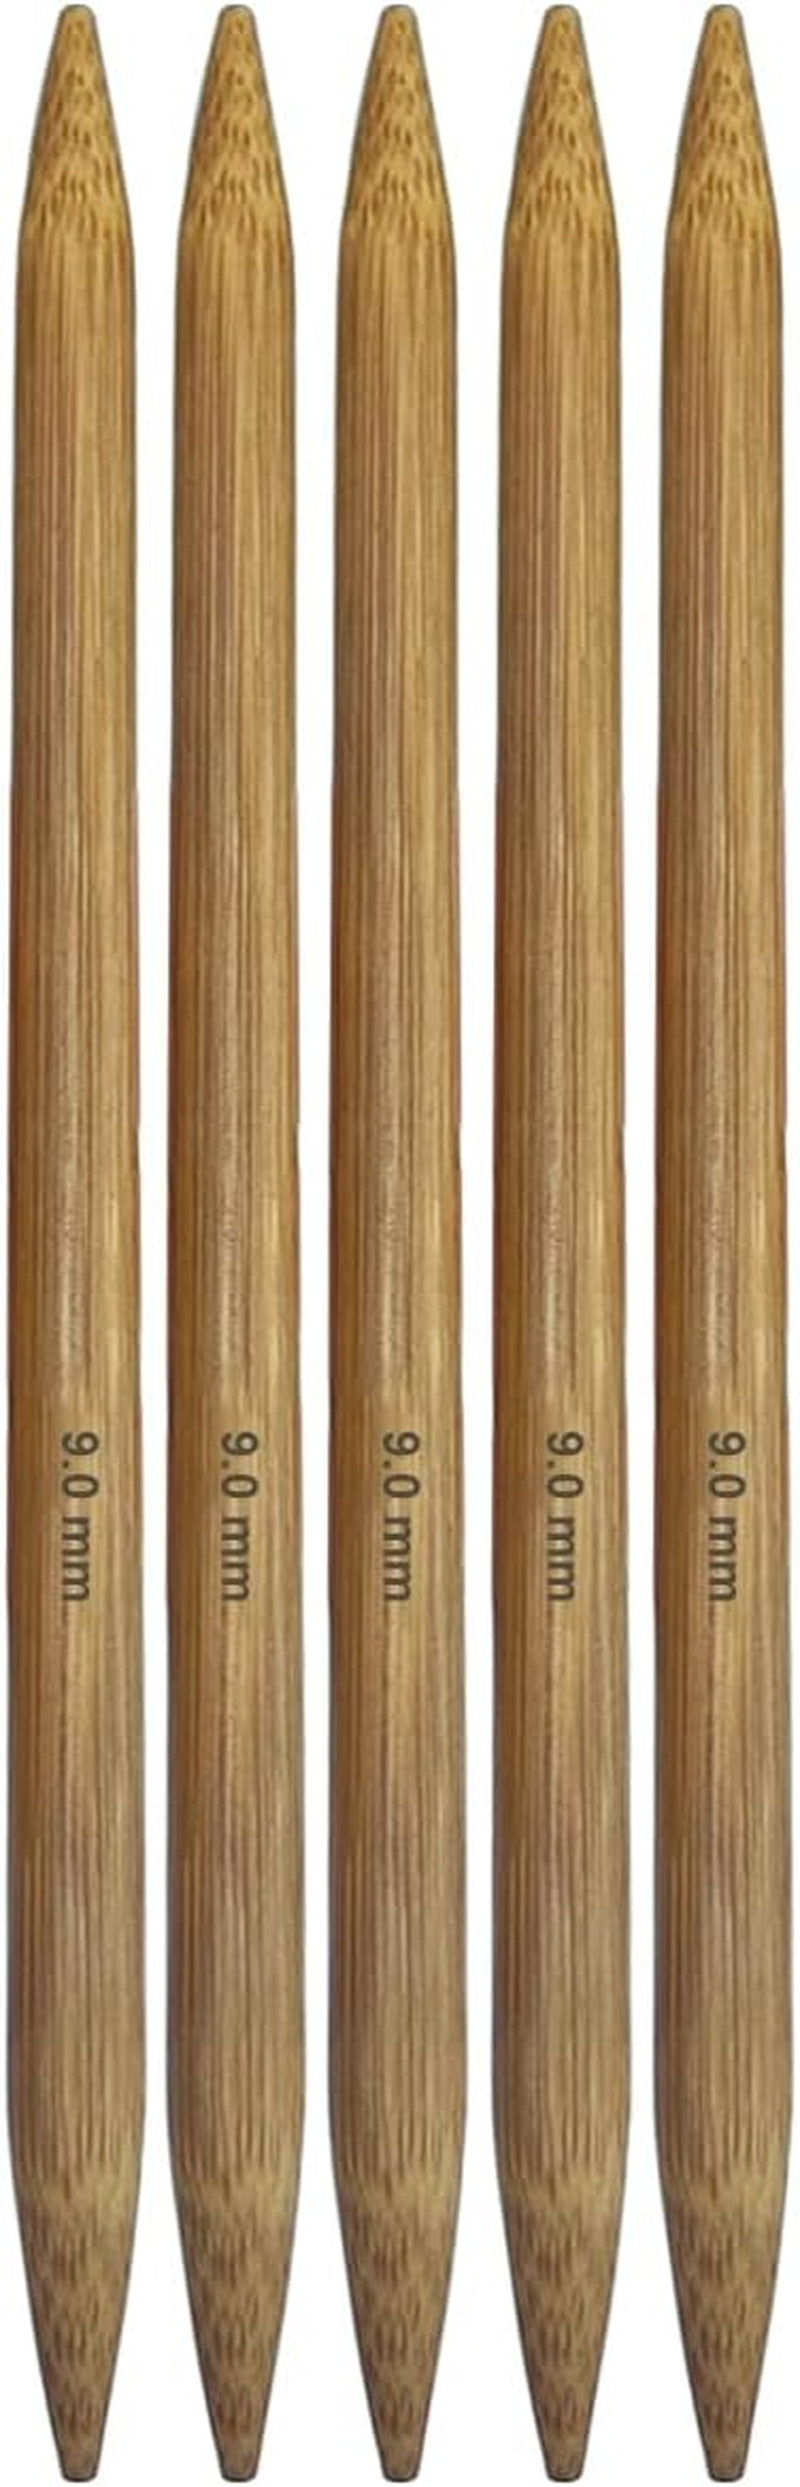 Bamboo Double Pointed Knitting Needles Carbonized Bamboo Knitting Needle 7.9 Inch(20Cm) Length for Handmade Creative DIY Knitting Yarn Projects,Size US 13(9Mm)